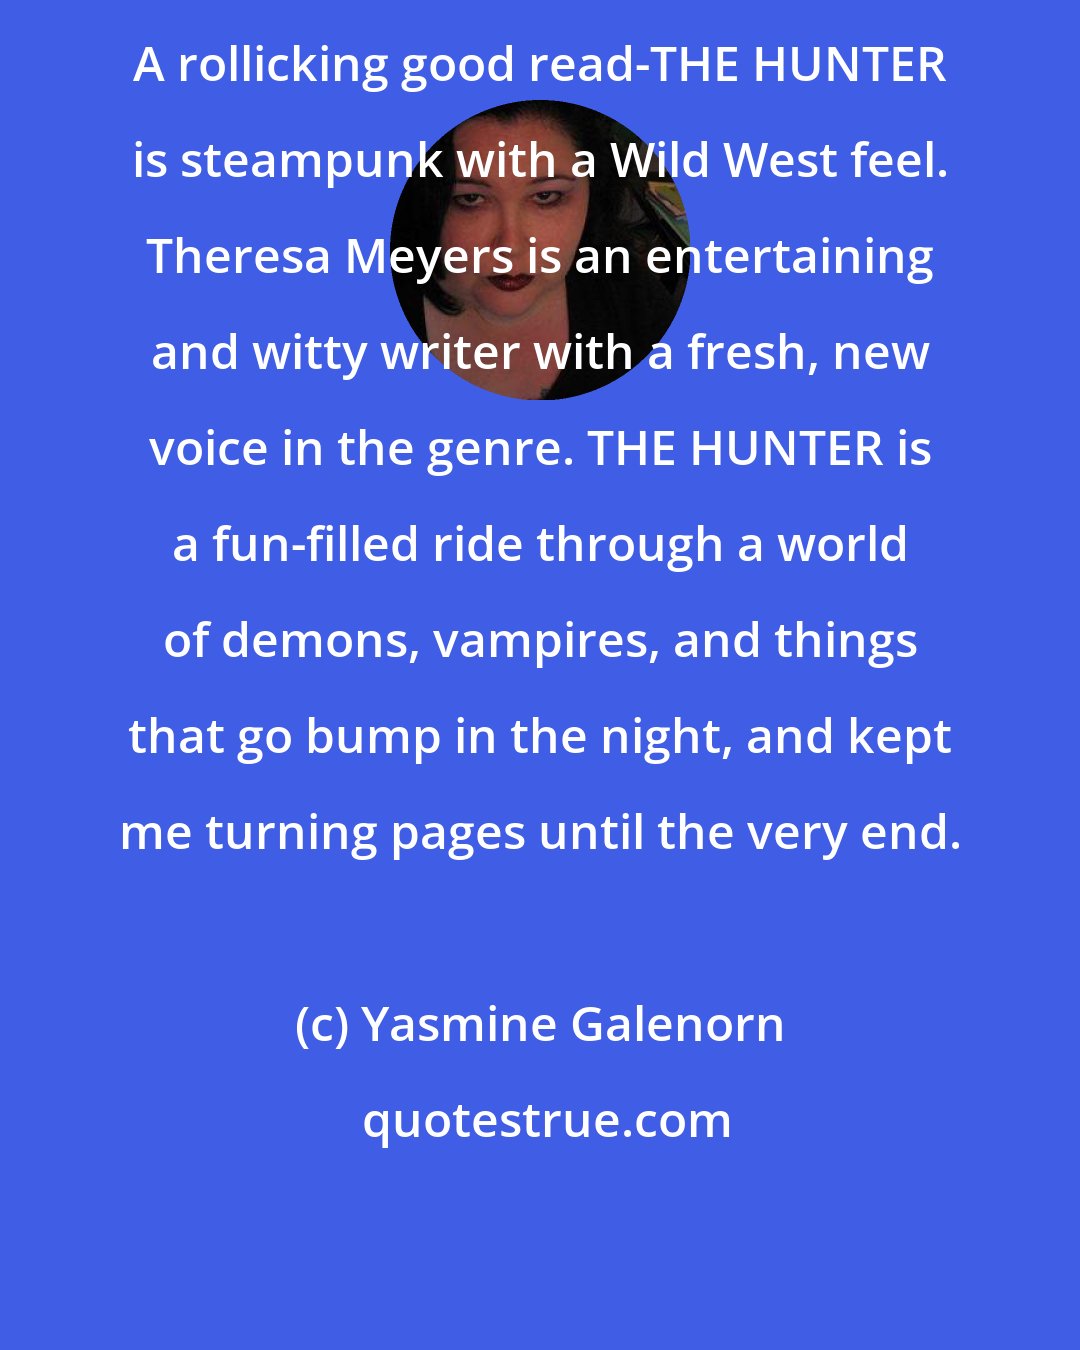 Yasmine Galenorn: A rollicking good read-THE HUNTER is steampunk with a Wild West feel. Theresa Meyers is an entertaining and witty writer with a fresh, new voice in the genre. THE HUNTER is a fun-filled ride through a world of demons, vampires, and things that go bump in the night, and kept me turning pages until the very end.